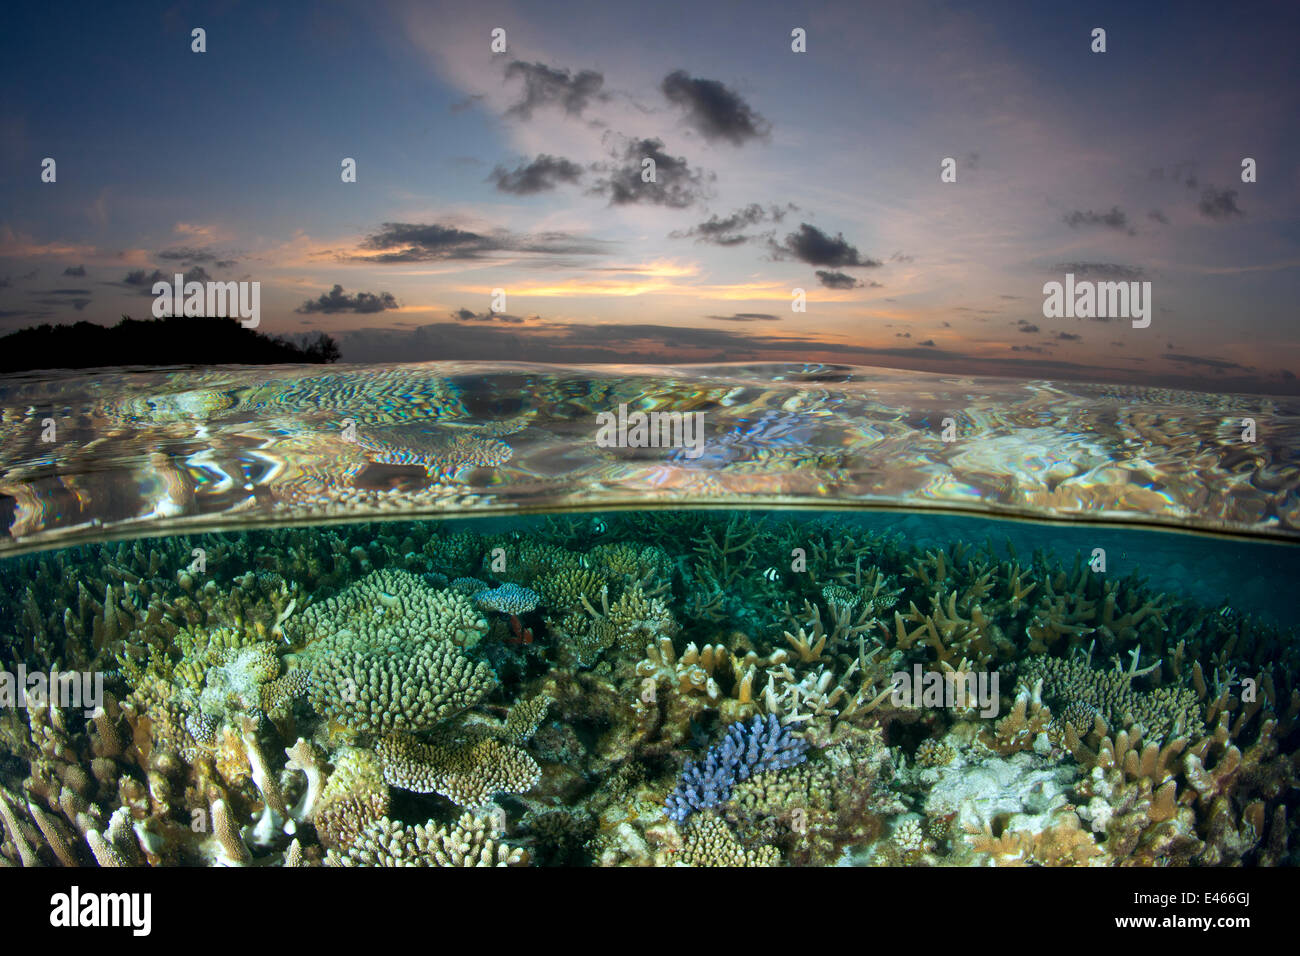 Reef under the surface of shallow waters, at sunset, covered with hard corals, Brush Coral (Acropora hyacinthus) Robust Acropora (Acropora robusta) and other Acropora, Maldives, Indian Ocean Stock Photo